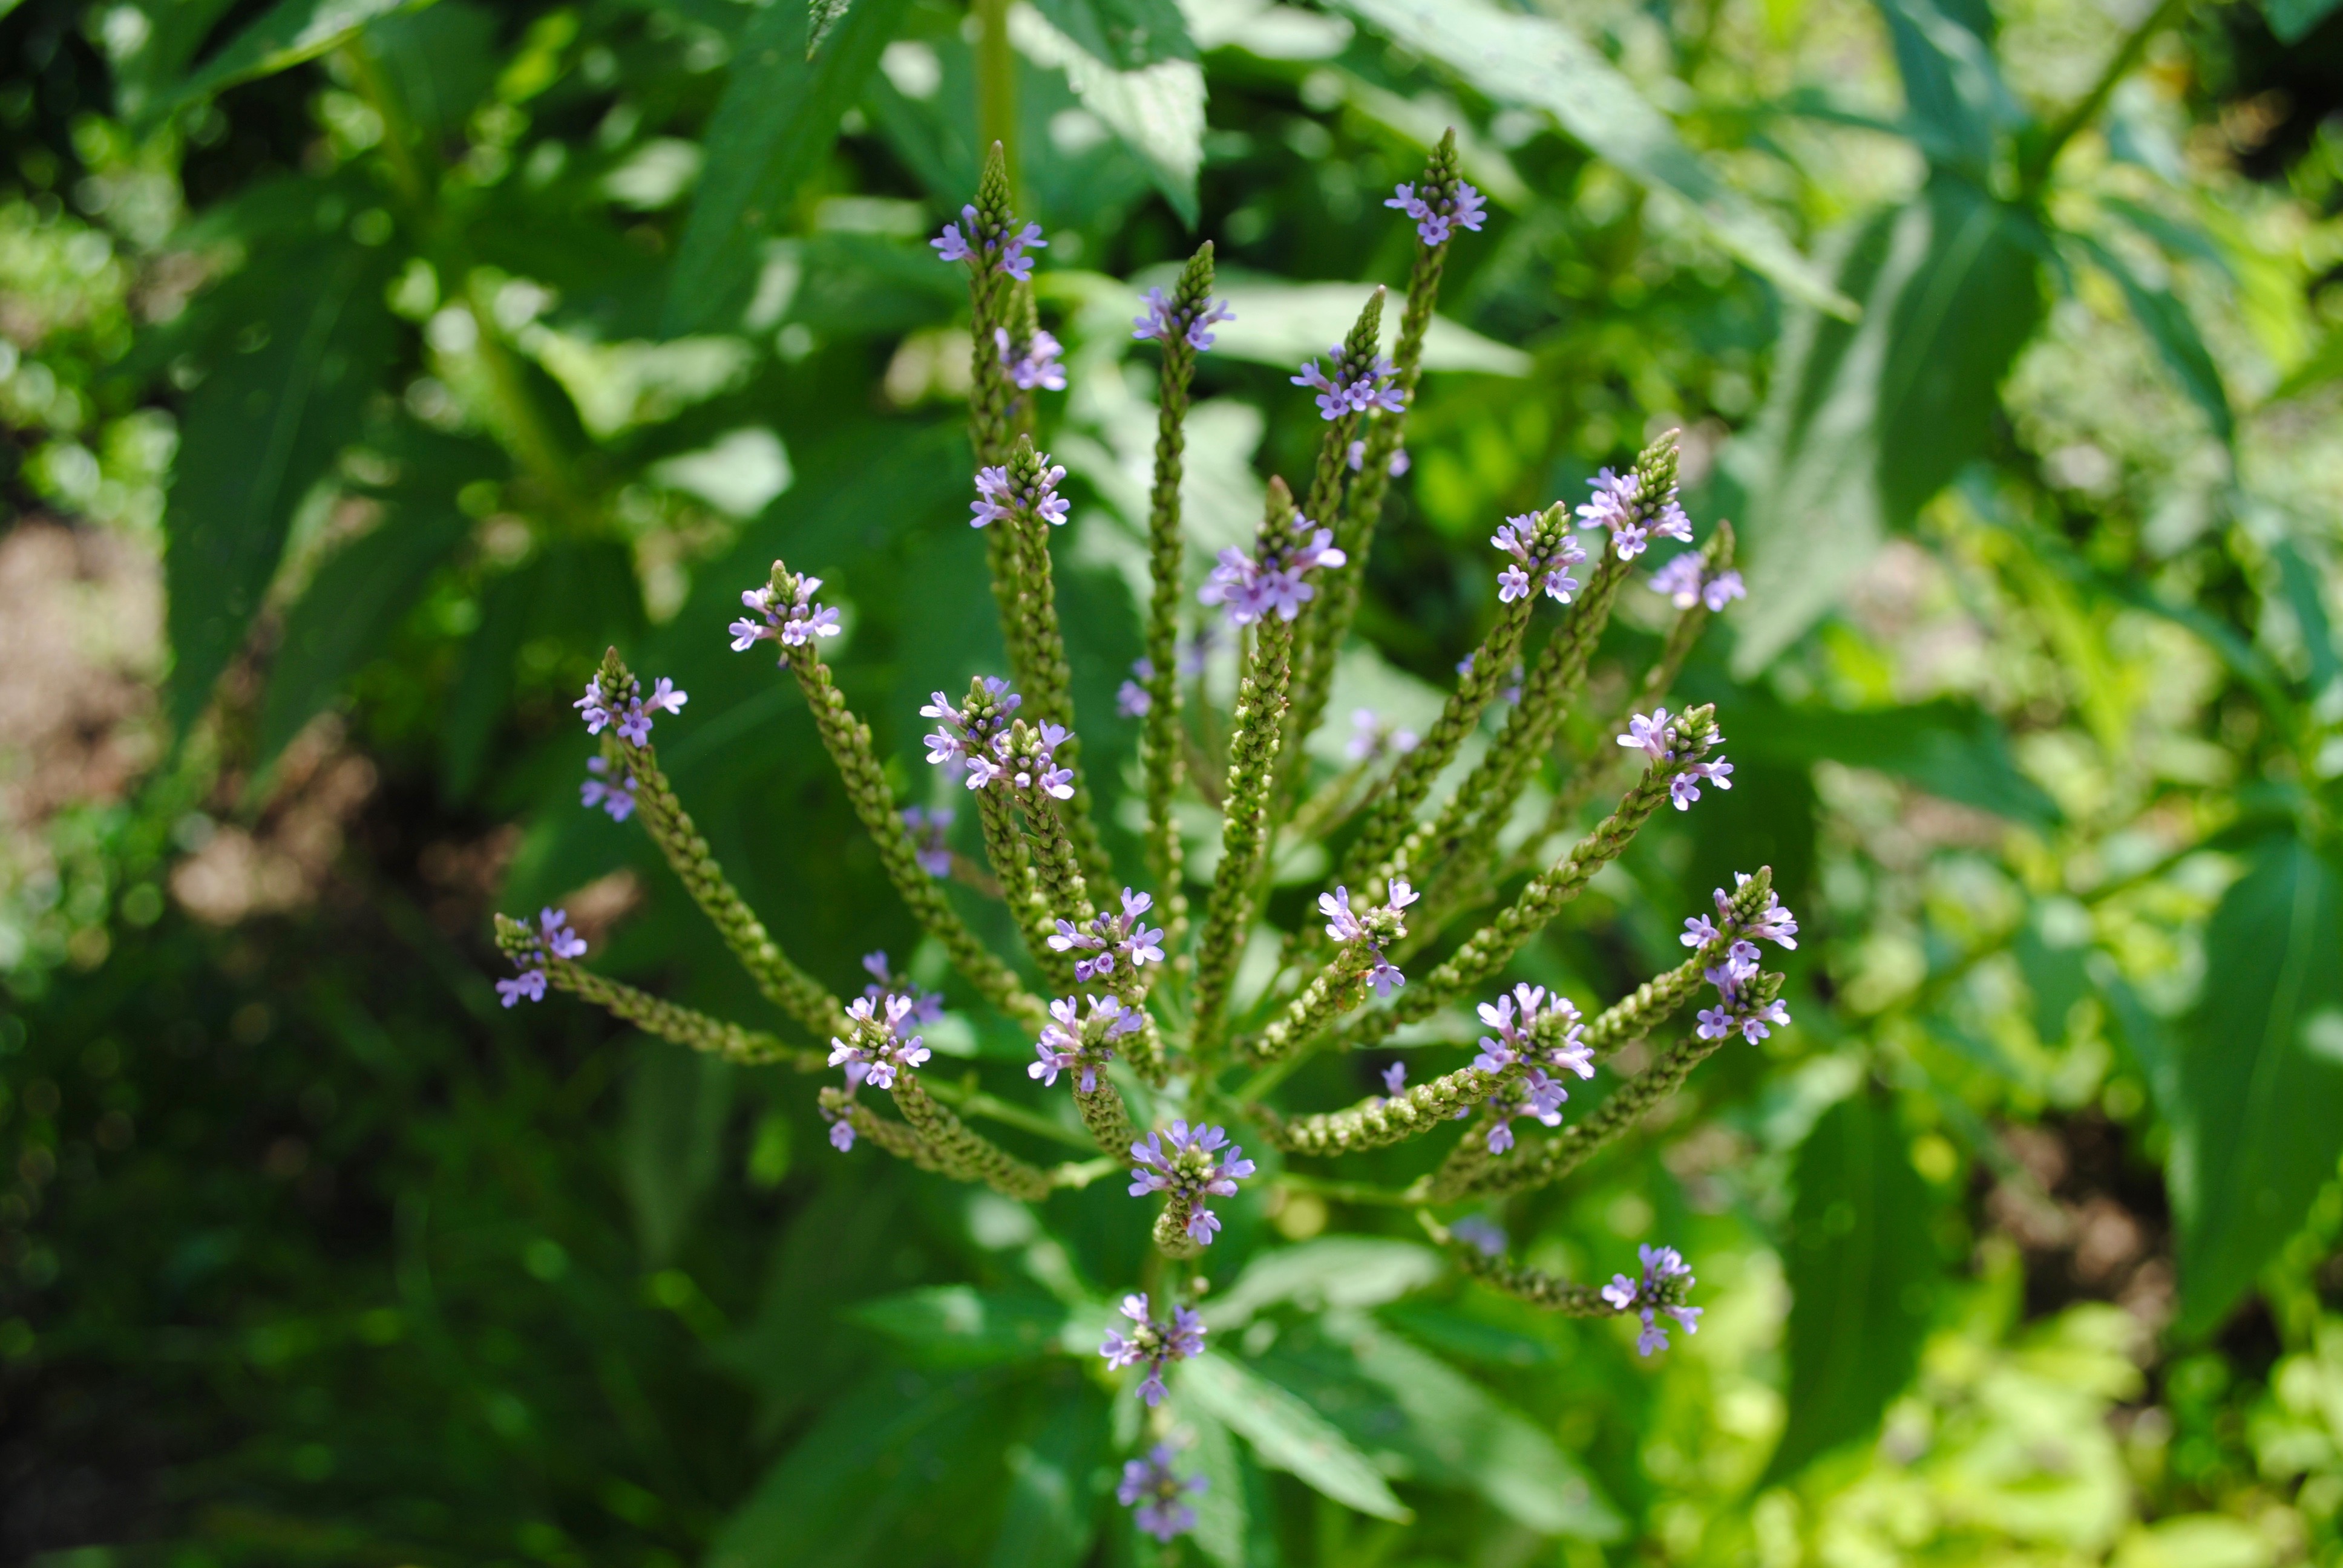 Blue Vervain (Verbena hastata) in the Trail Conference Headquarters native landscape. Photo by Heather Darley.